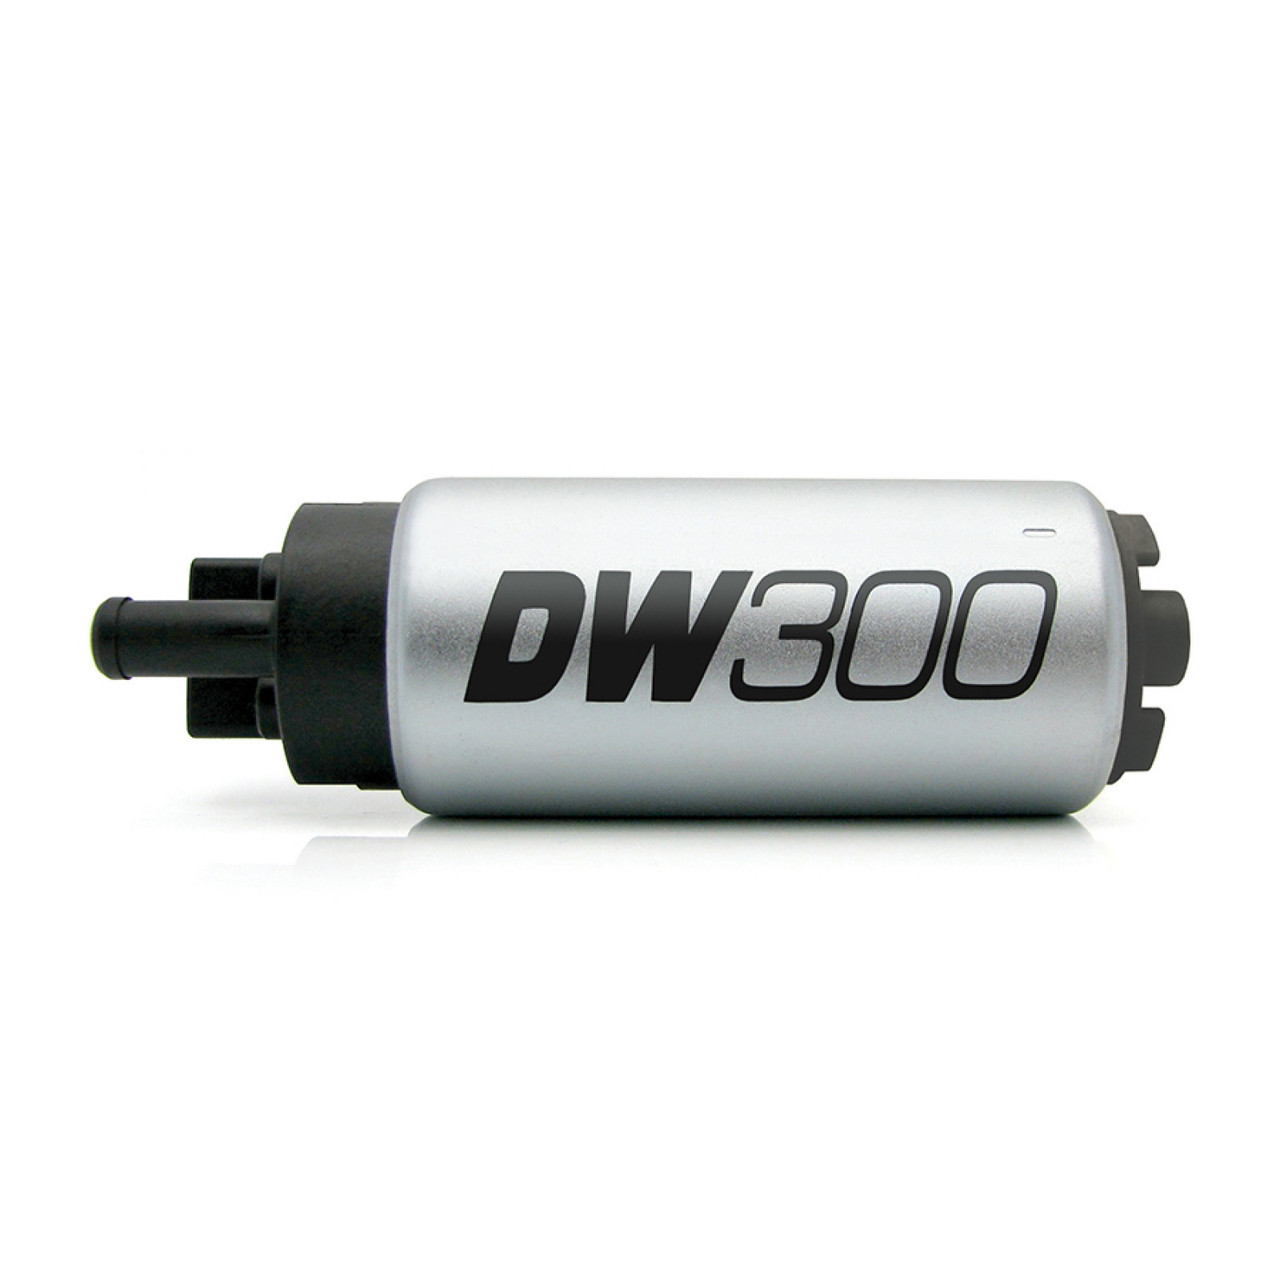 Deatschwerks DW300C 340lph Fuel Pump for 99-03 Ford F-150 Lightning 02-04 and Ford F-150 (DEW-9-307-1013)